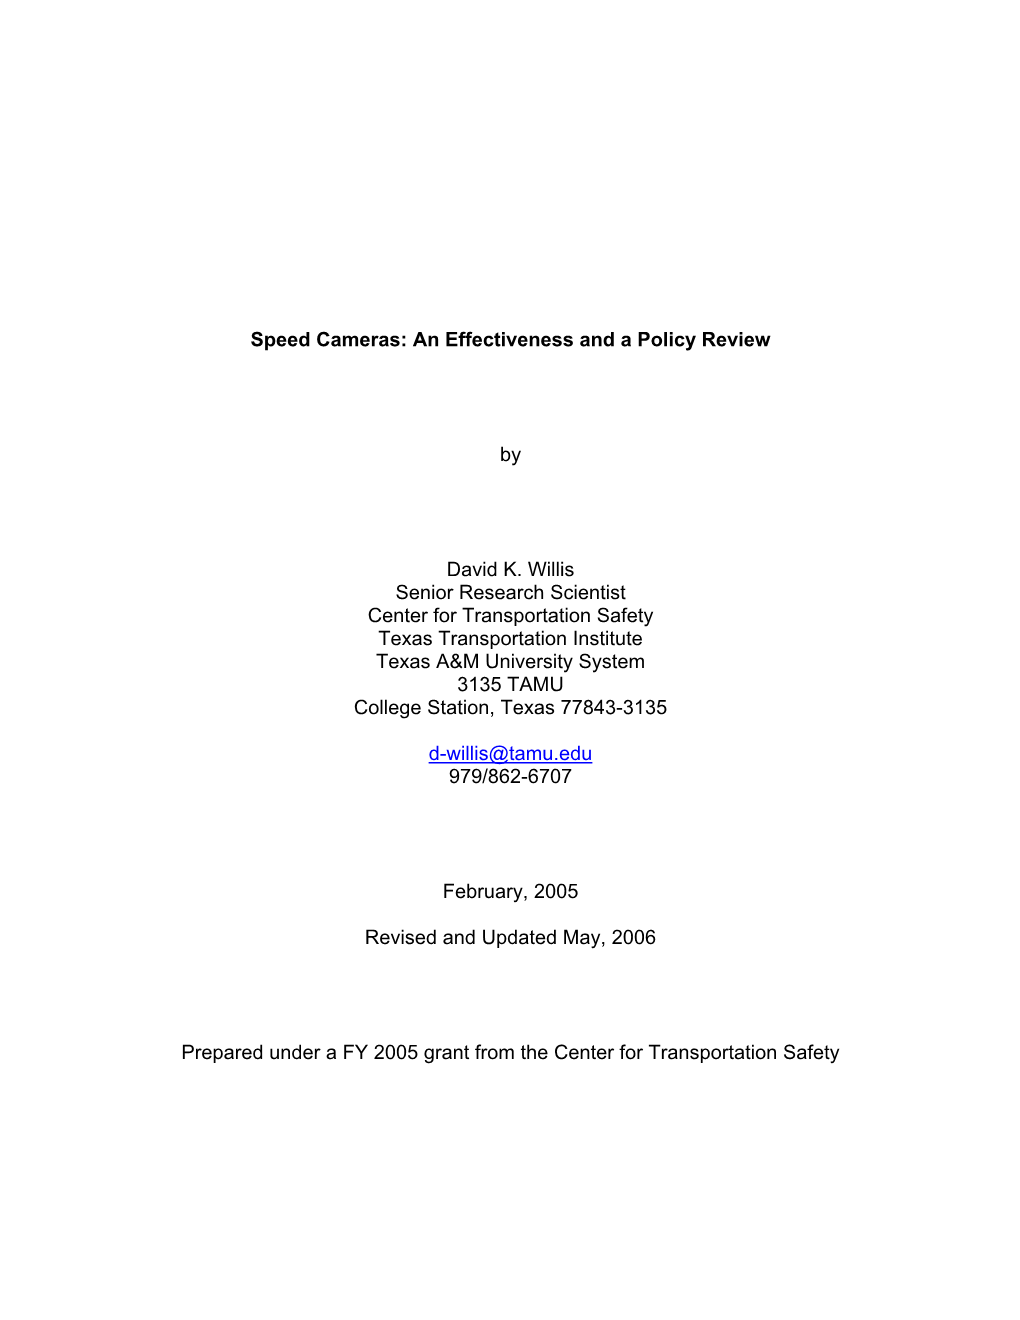 Speed Cameras: an Effectiveness and a Policy Review